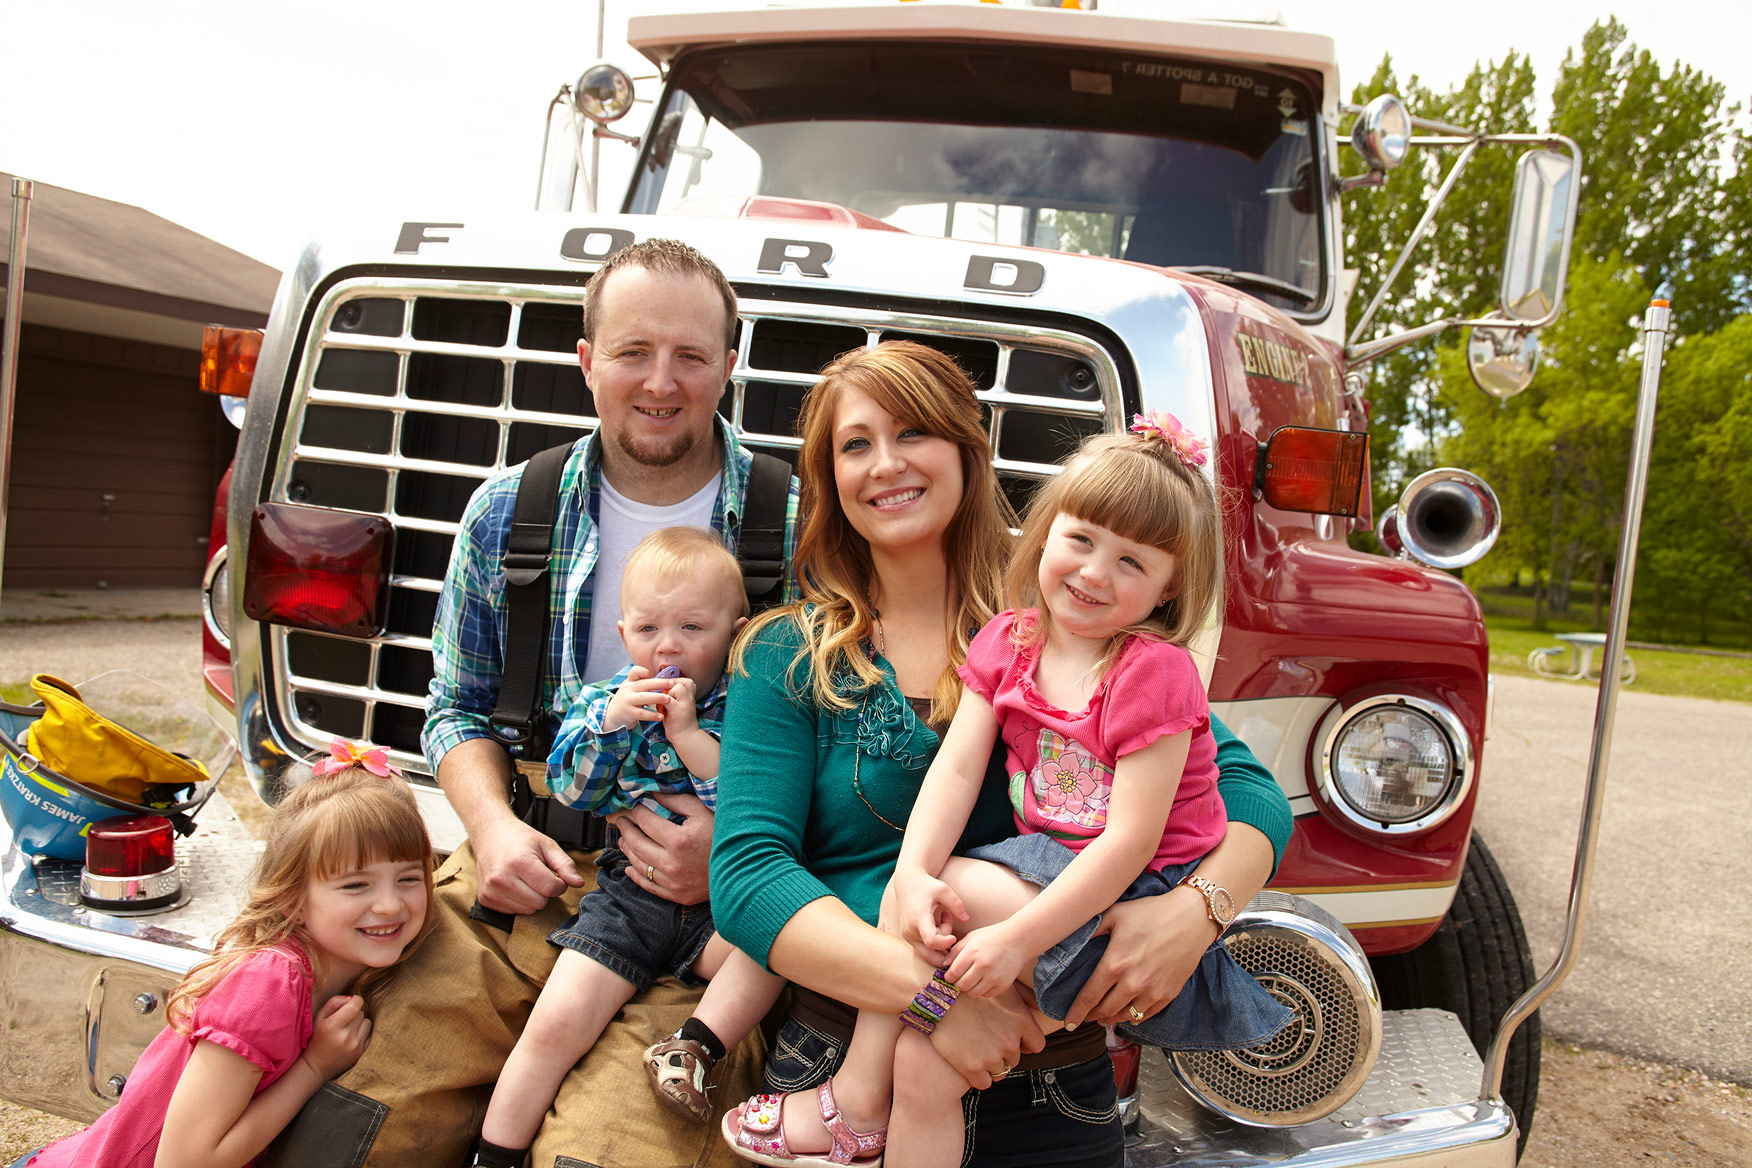 A firefighter father and his wife and 3 children in front of an old, red firetruck.